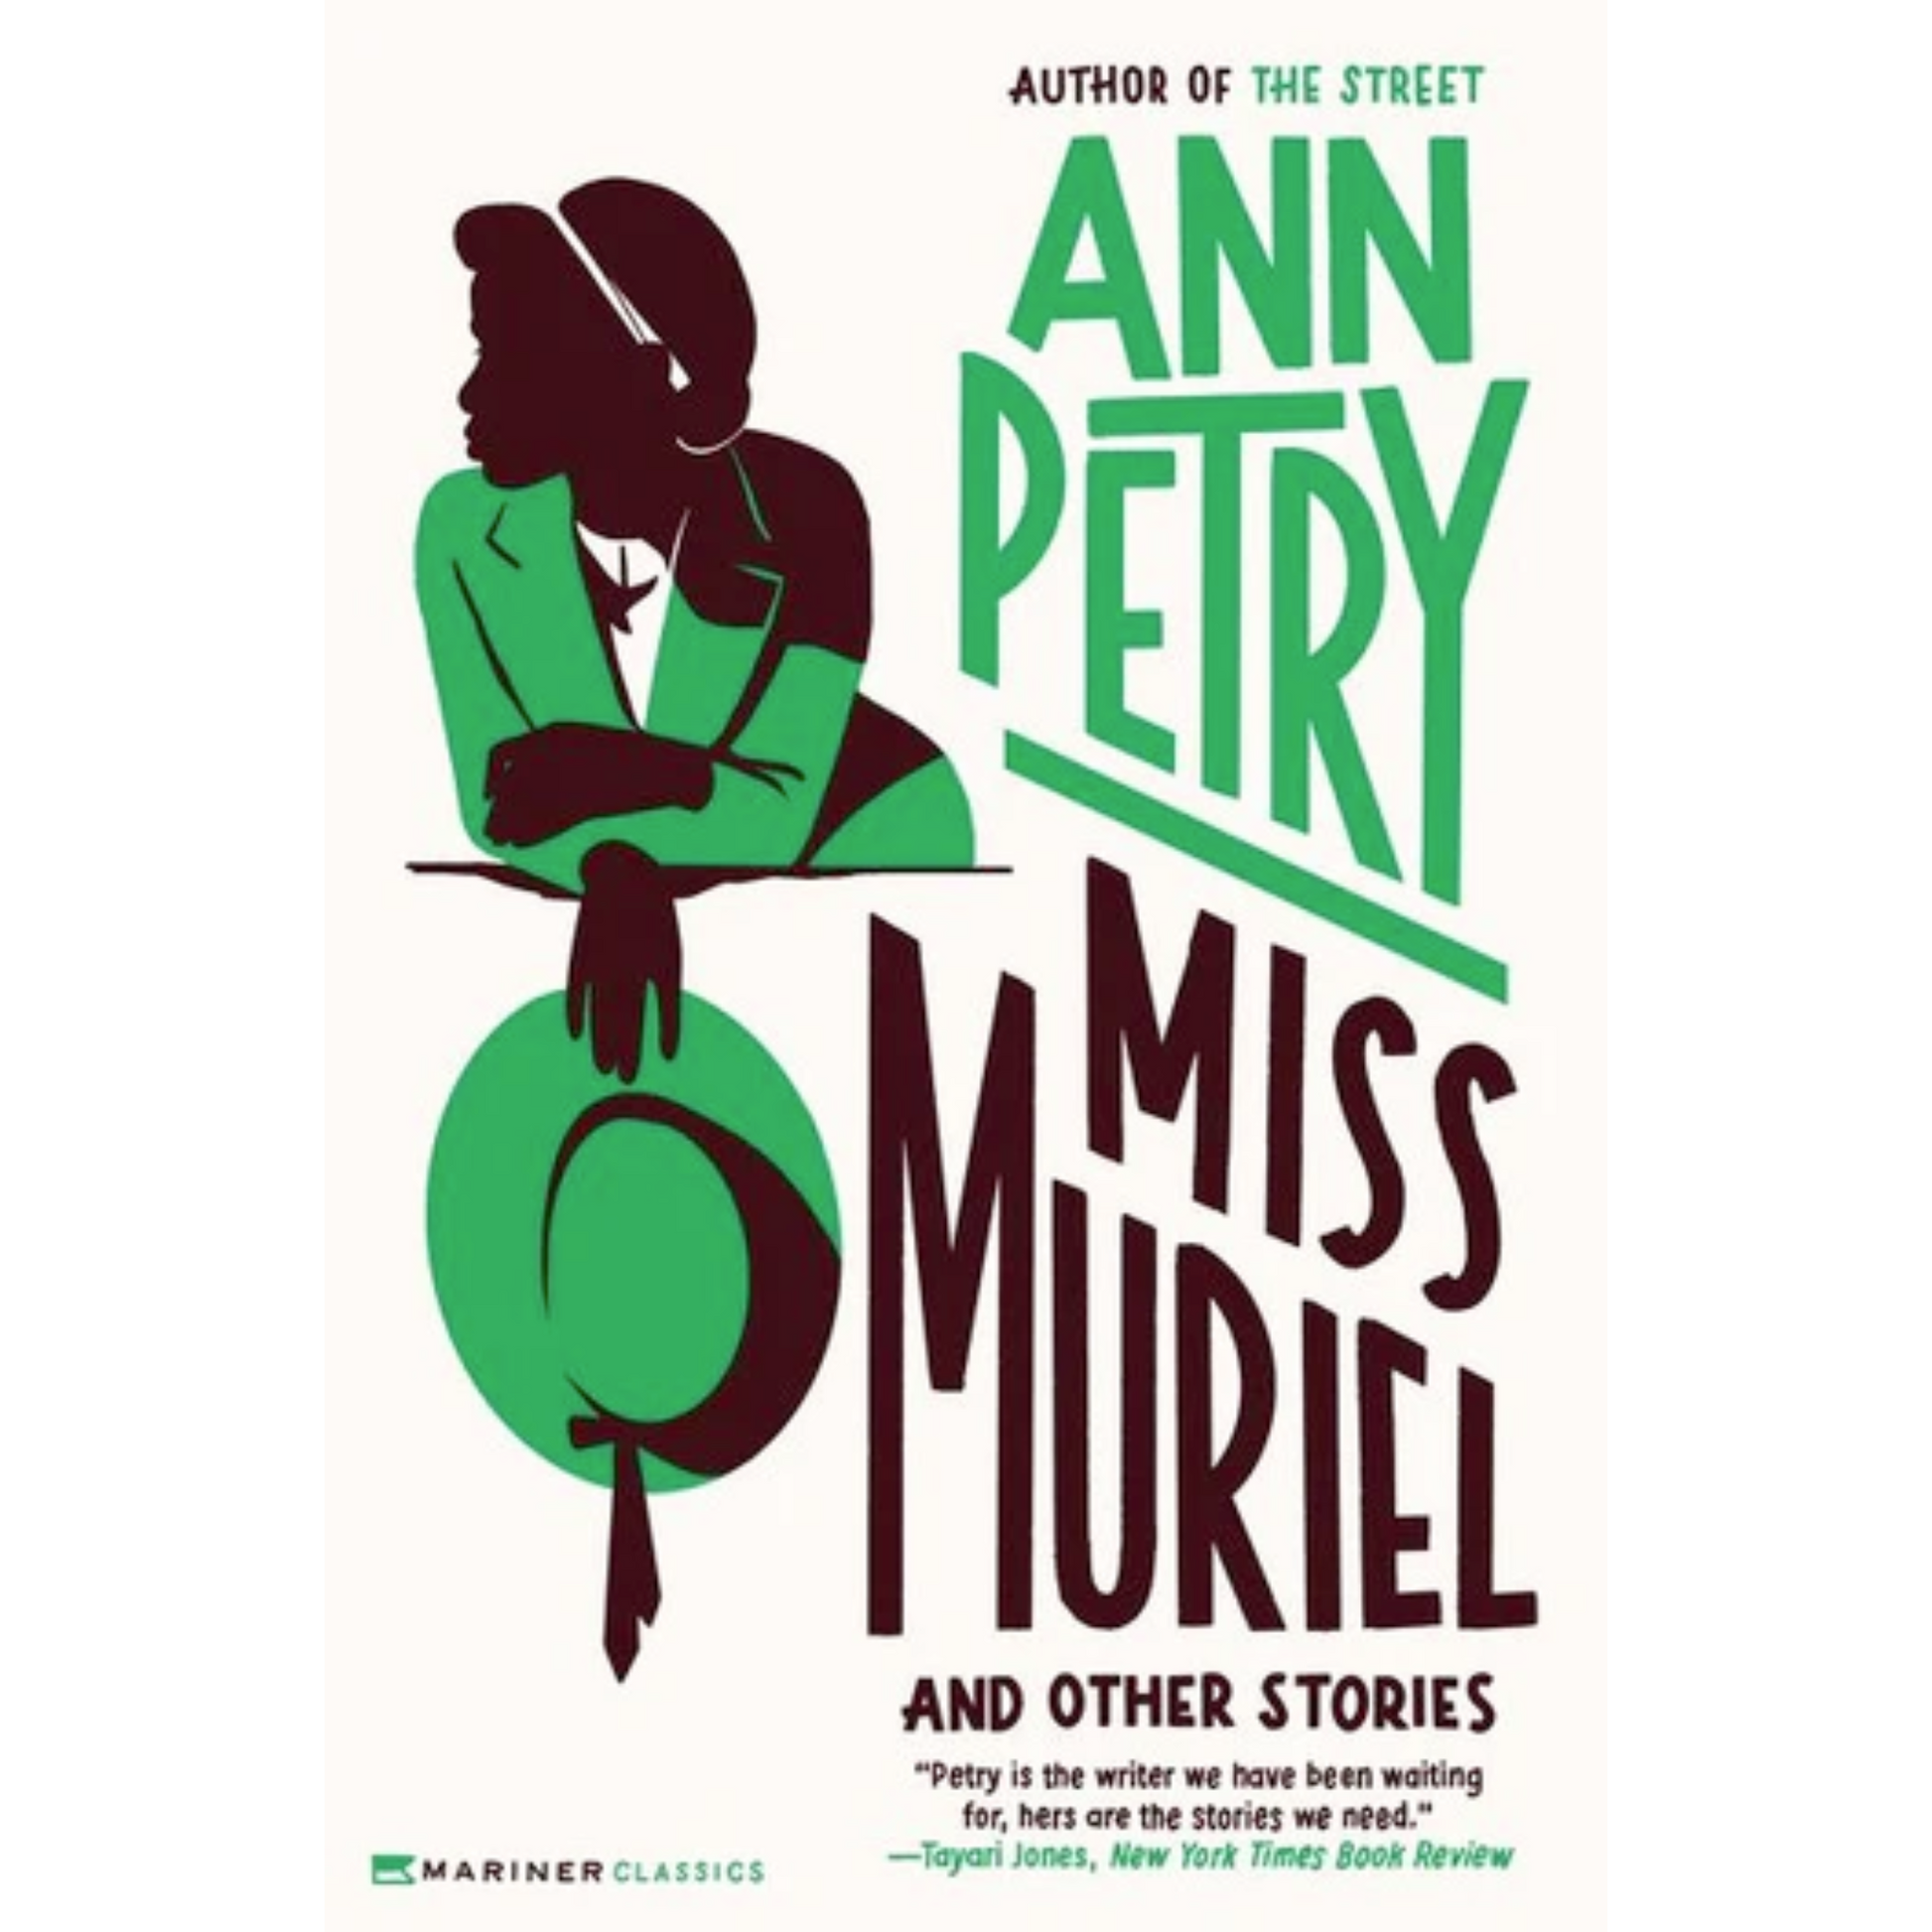 miss muriel and other stories ann petry